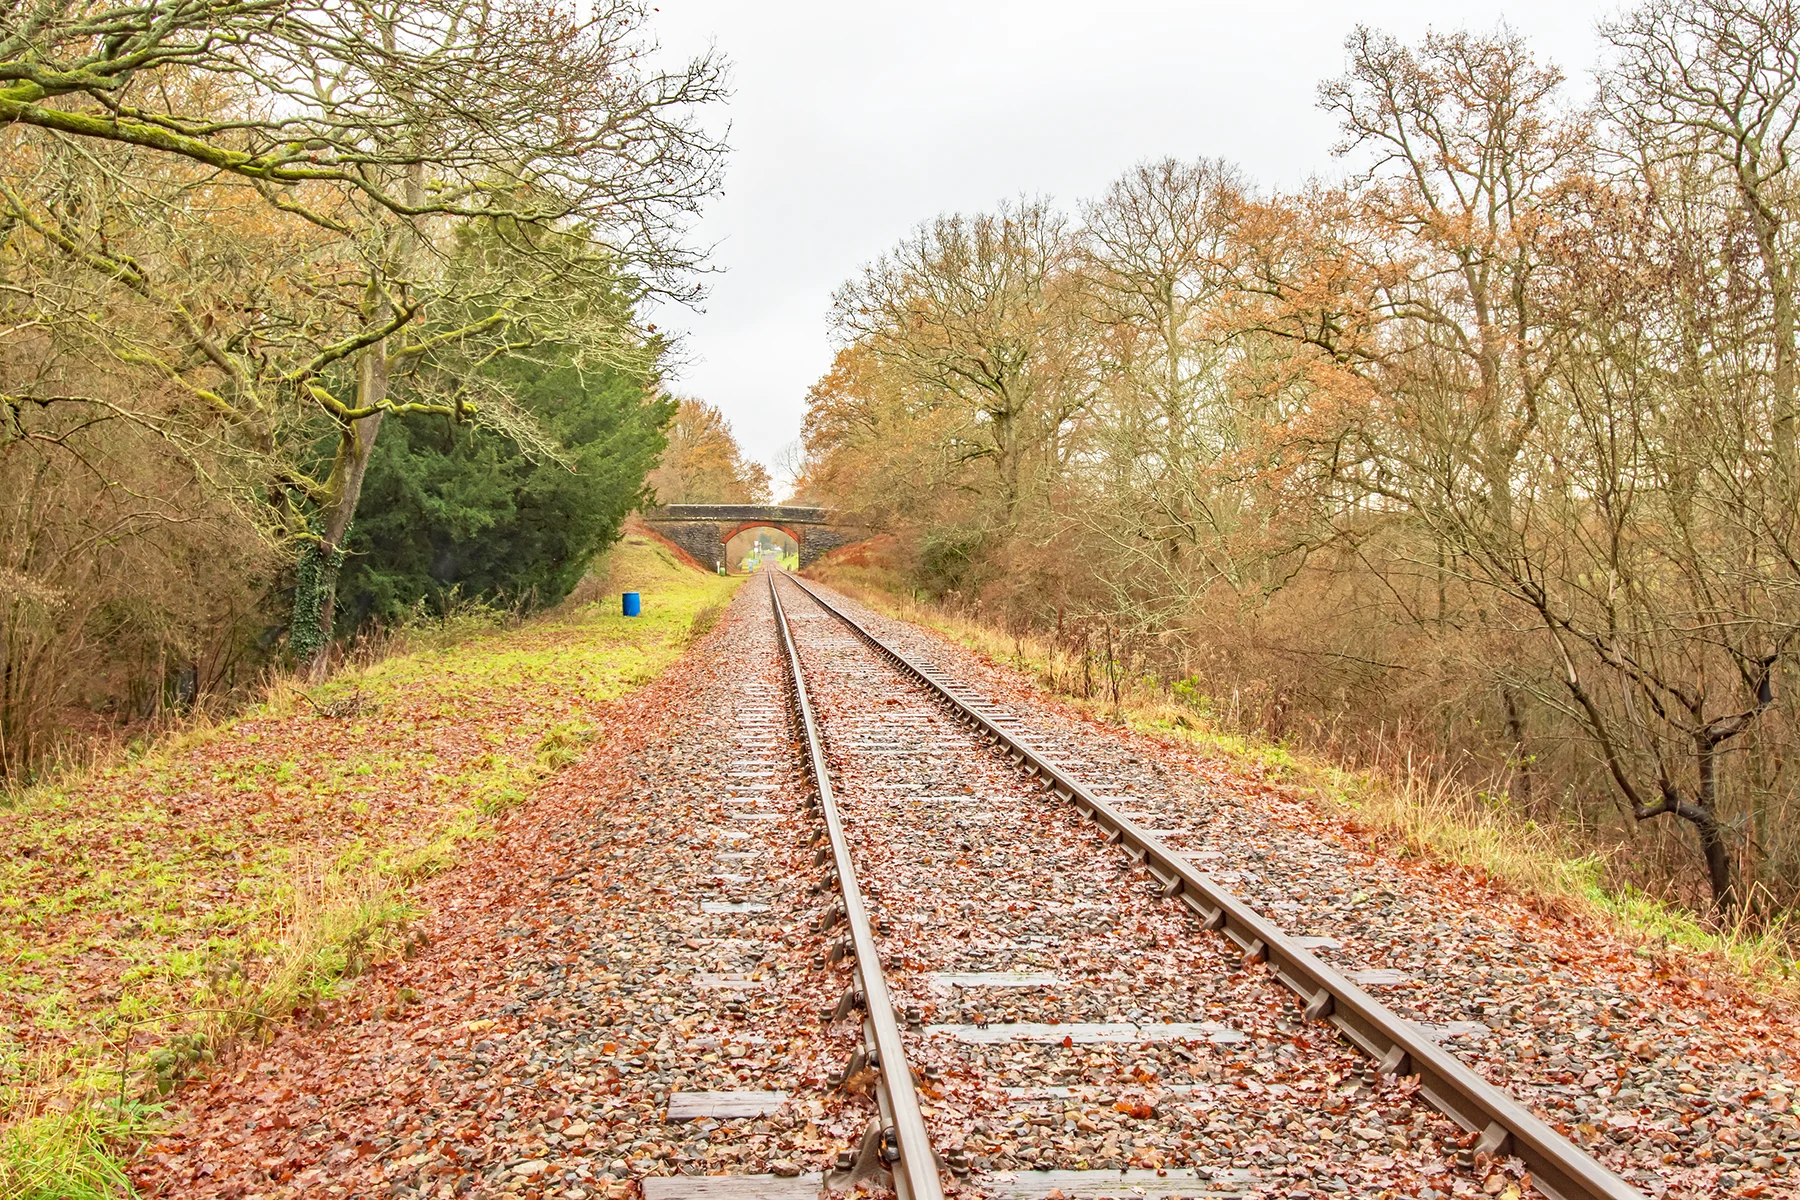 A railway track on an autumn day, there are trees both sides of the track and the rails are covered with wet leaves